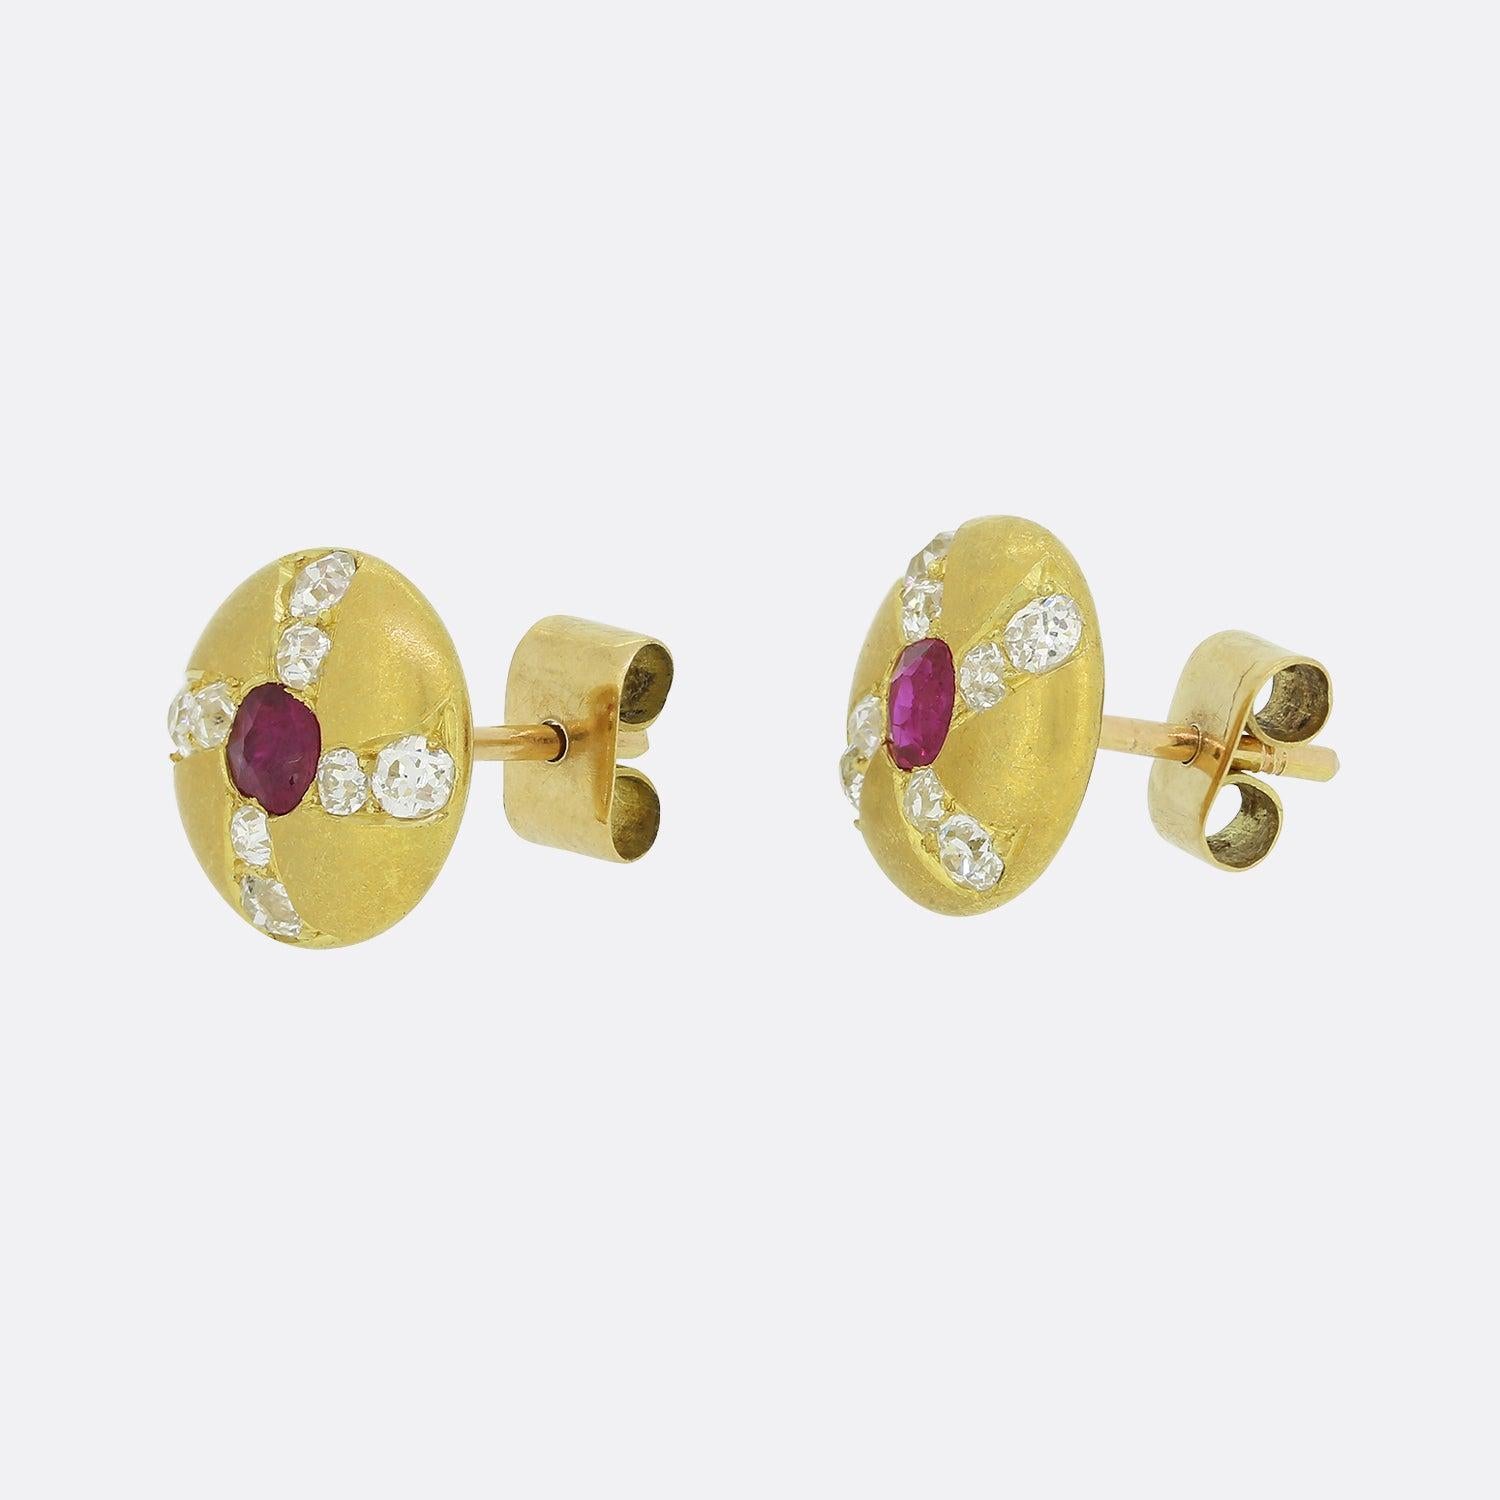 This is a lovely pair of antique ruby and diamond stud earrings. Each earring features a central ruby surrounded by 8 perfectly matched old cut diamonds. The diamonds are set in pairs and the earrings have a wonderful matte finish.

Condition: Used